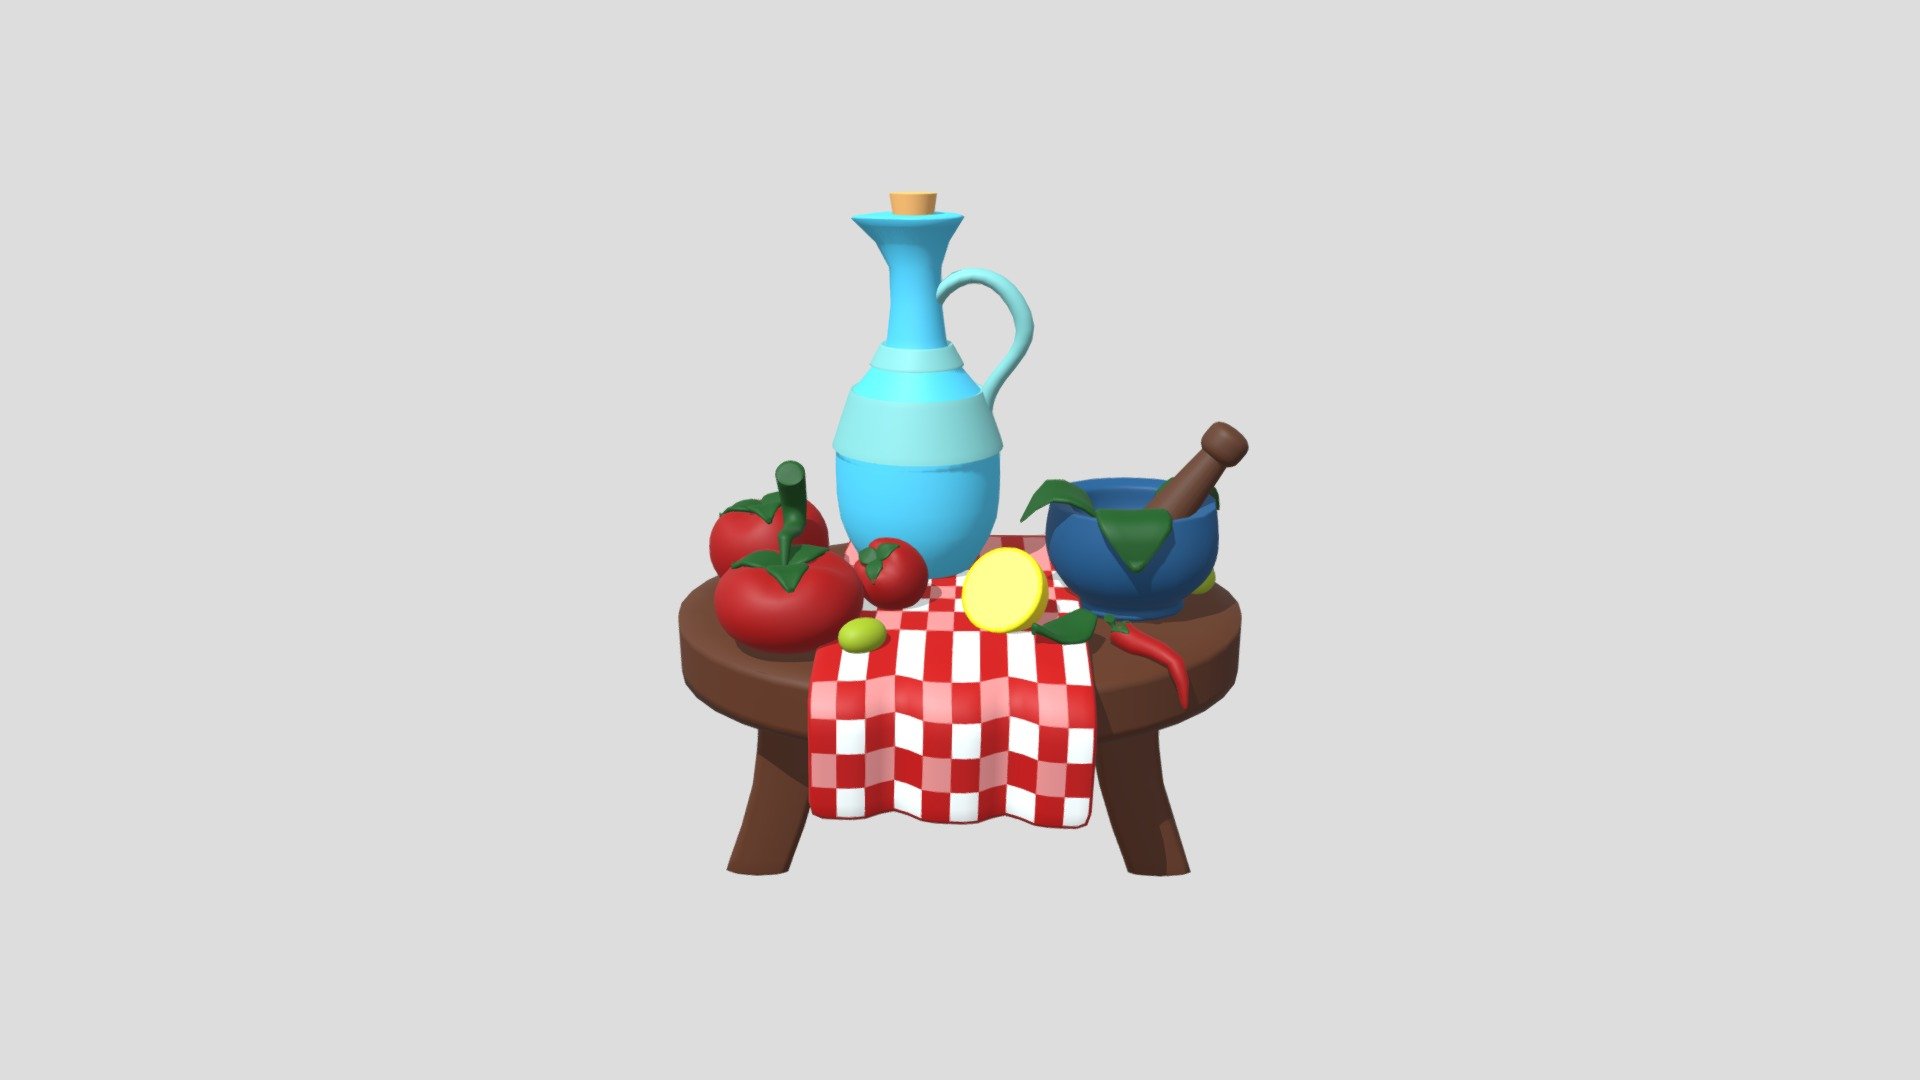 it is my model for our group game project.i think it is the best model that i have ever made.Model was inspired by another work - food and etc 3d model